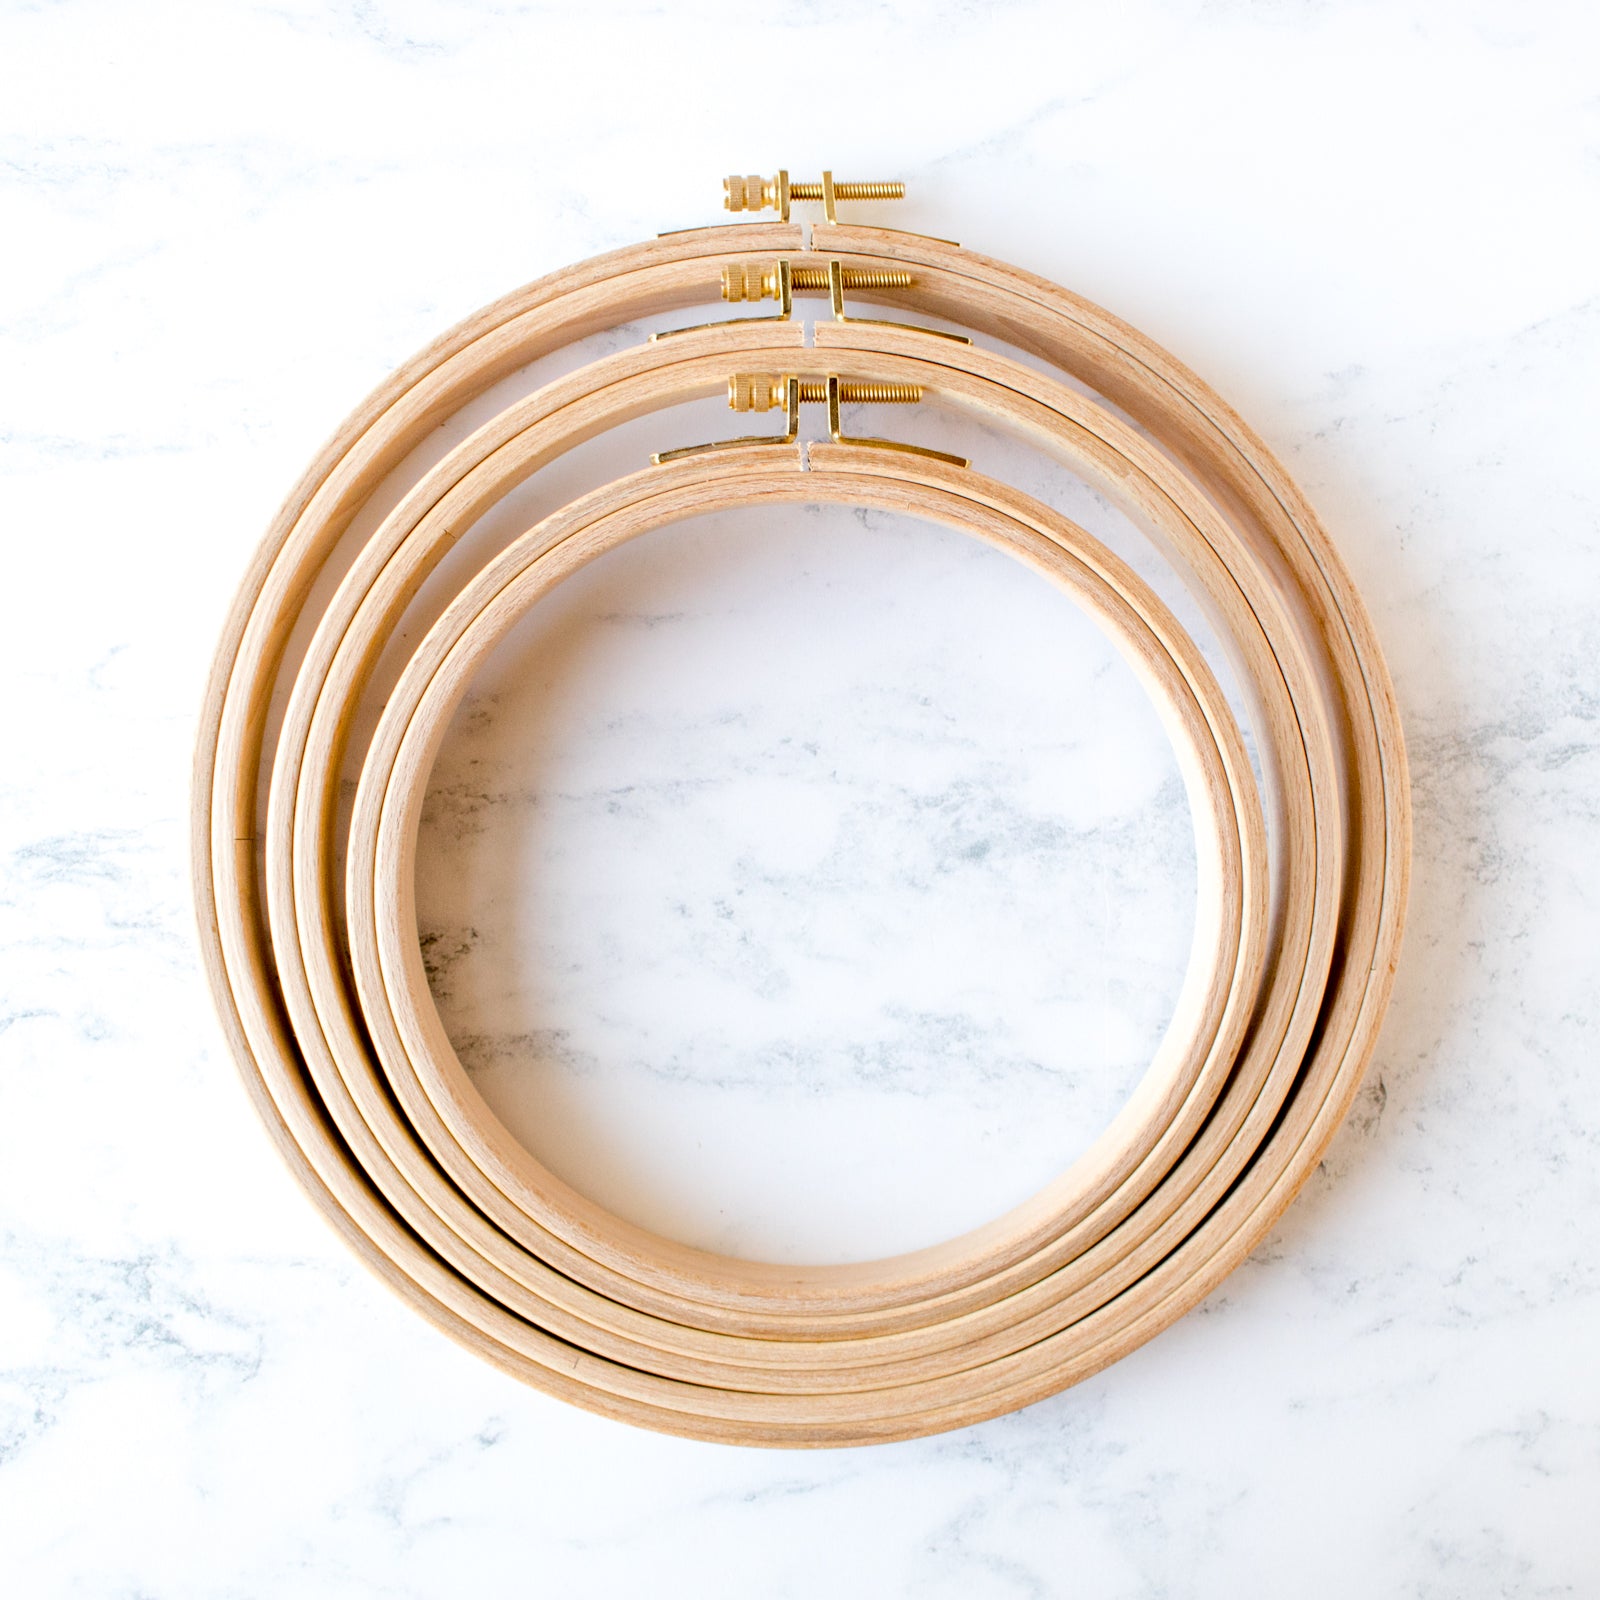 Premium Hardwood Embroidery Hoops - 5/8 Thick - Stitched Modern